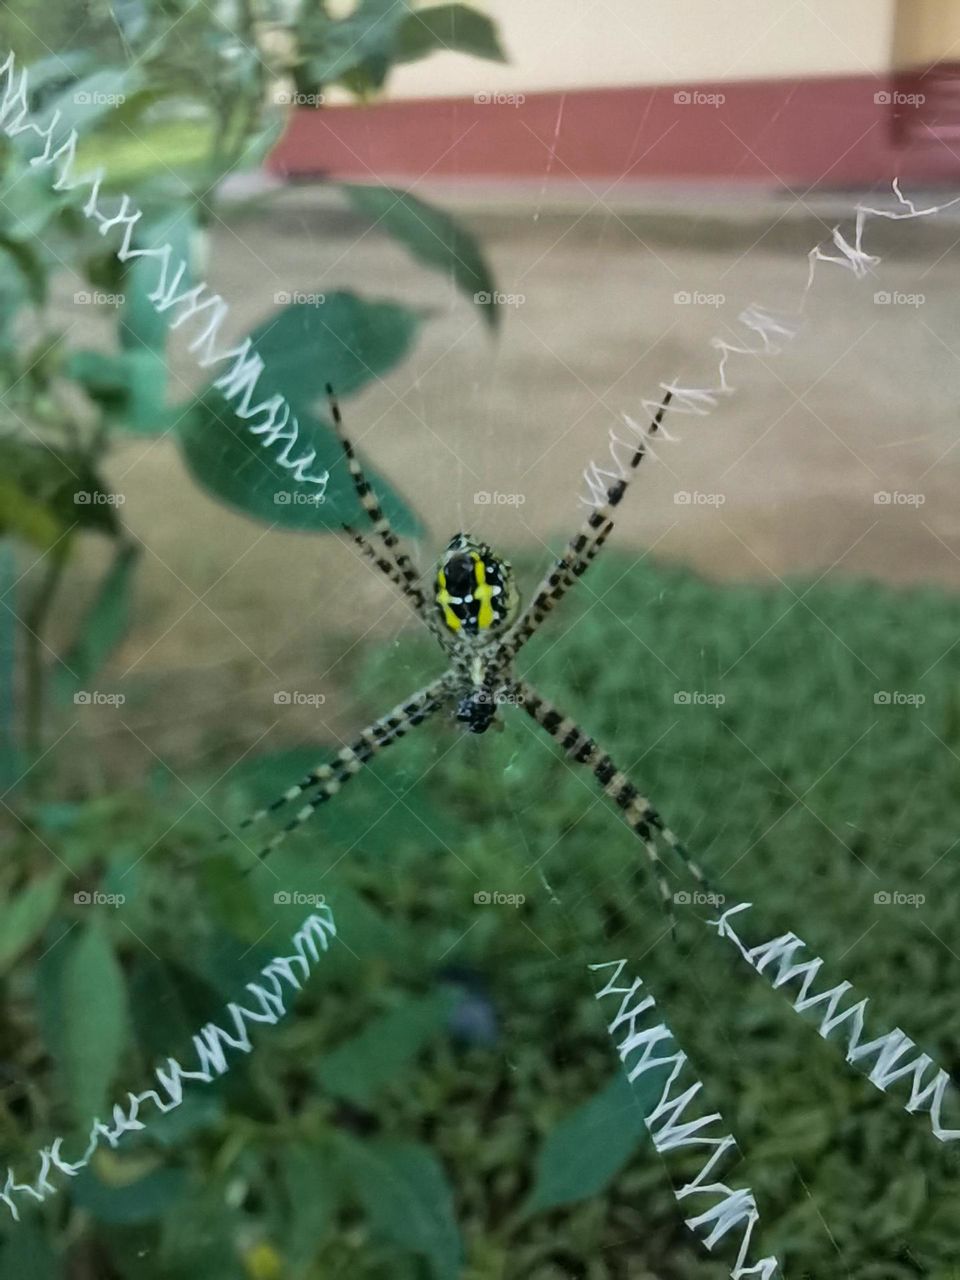 Spider with the net,